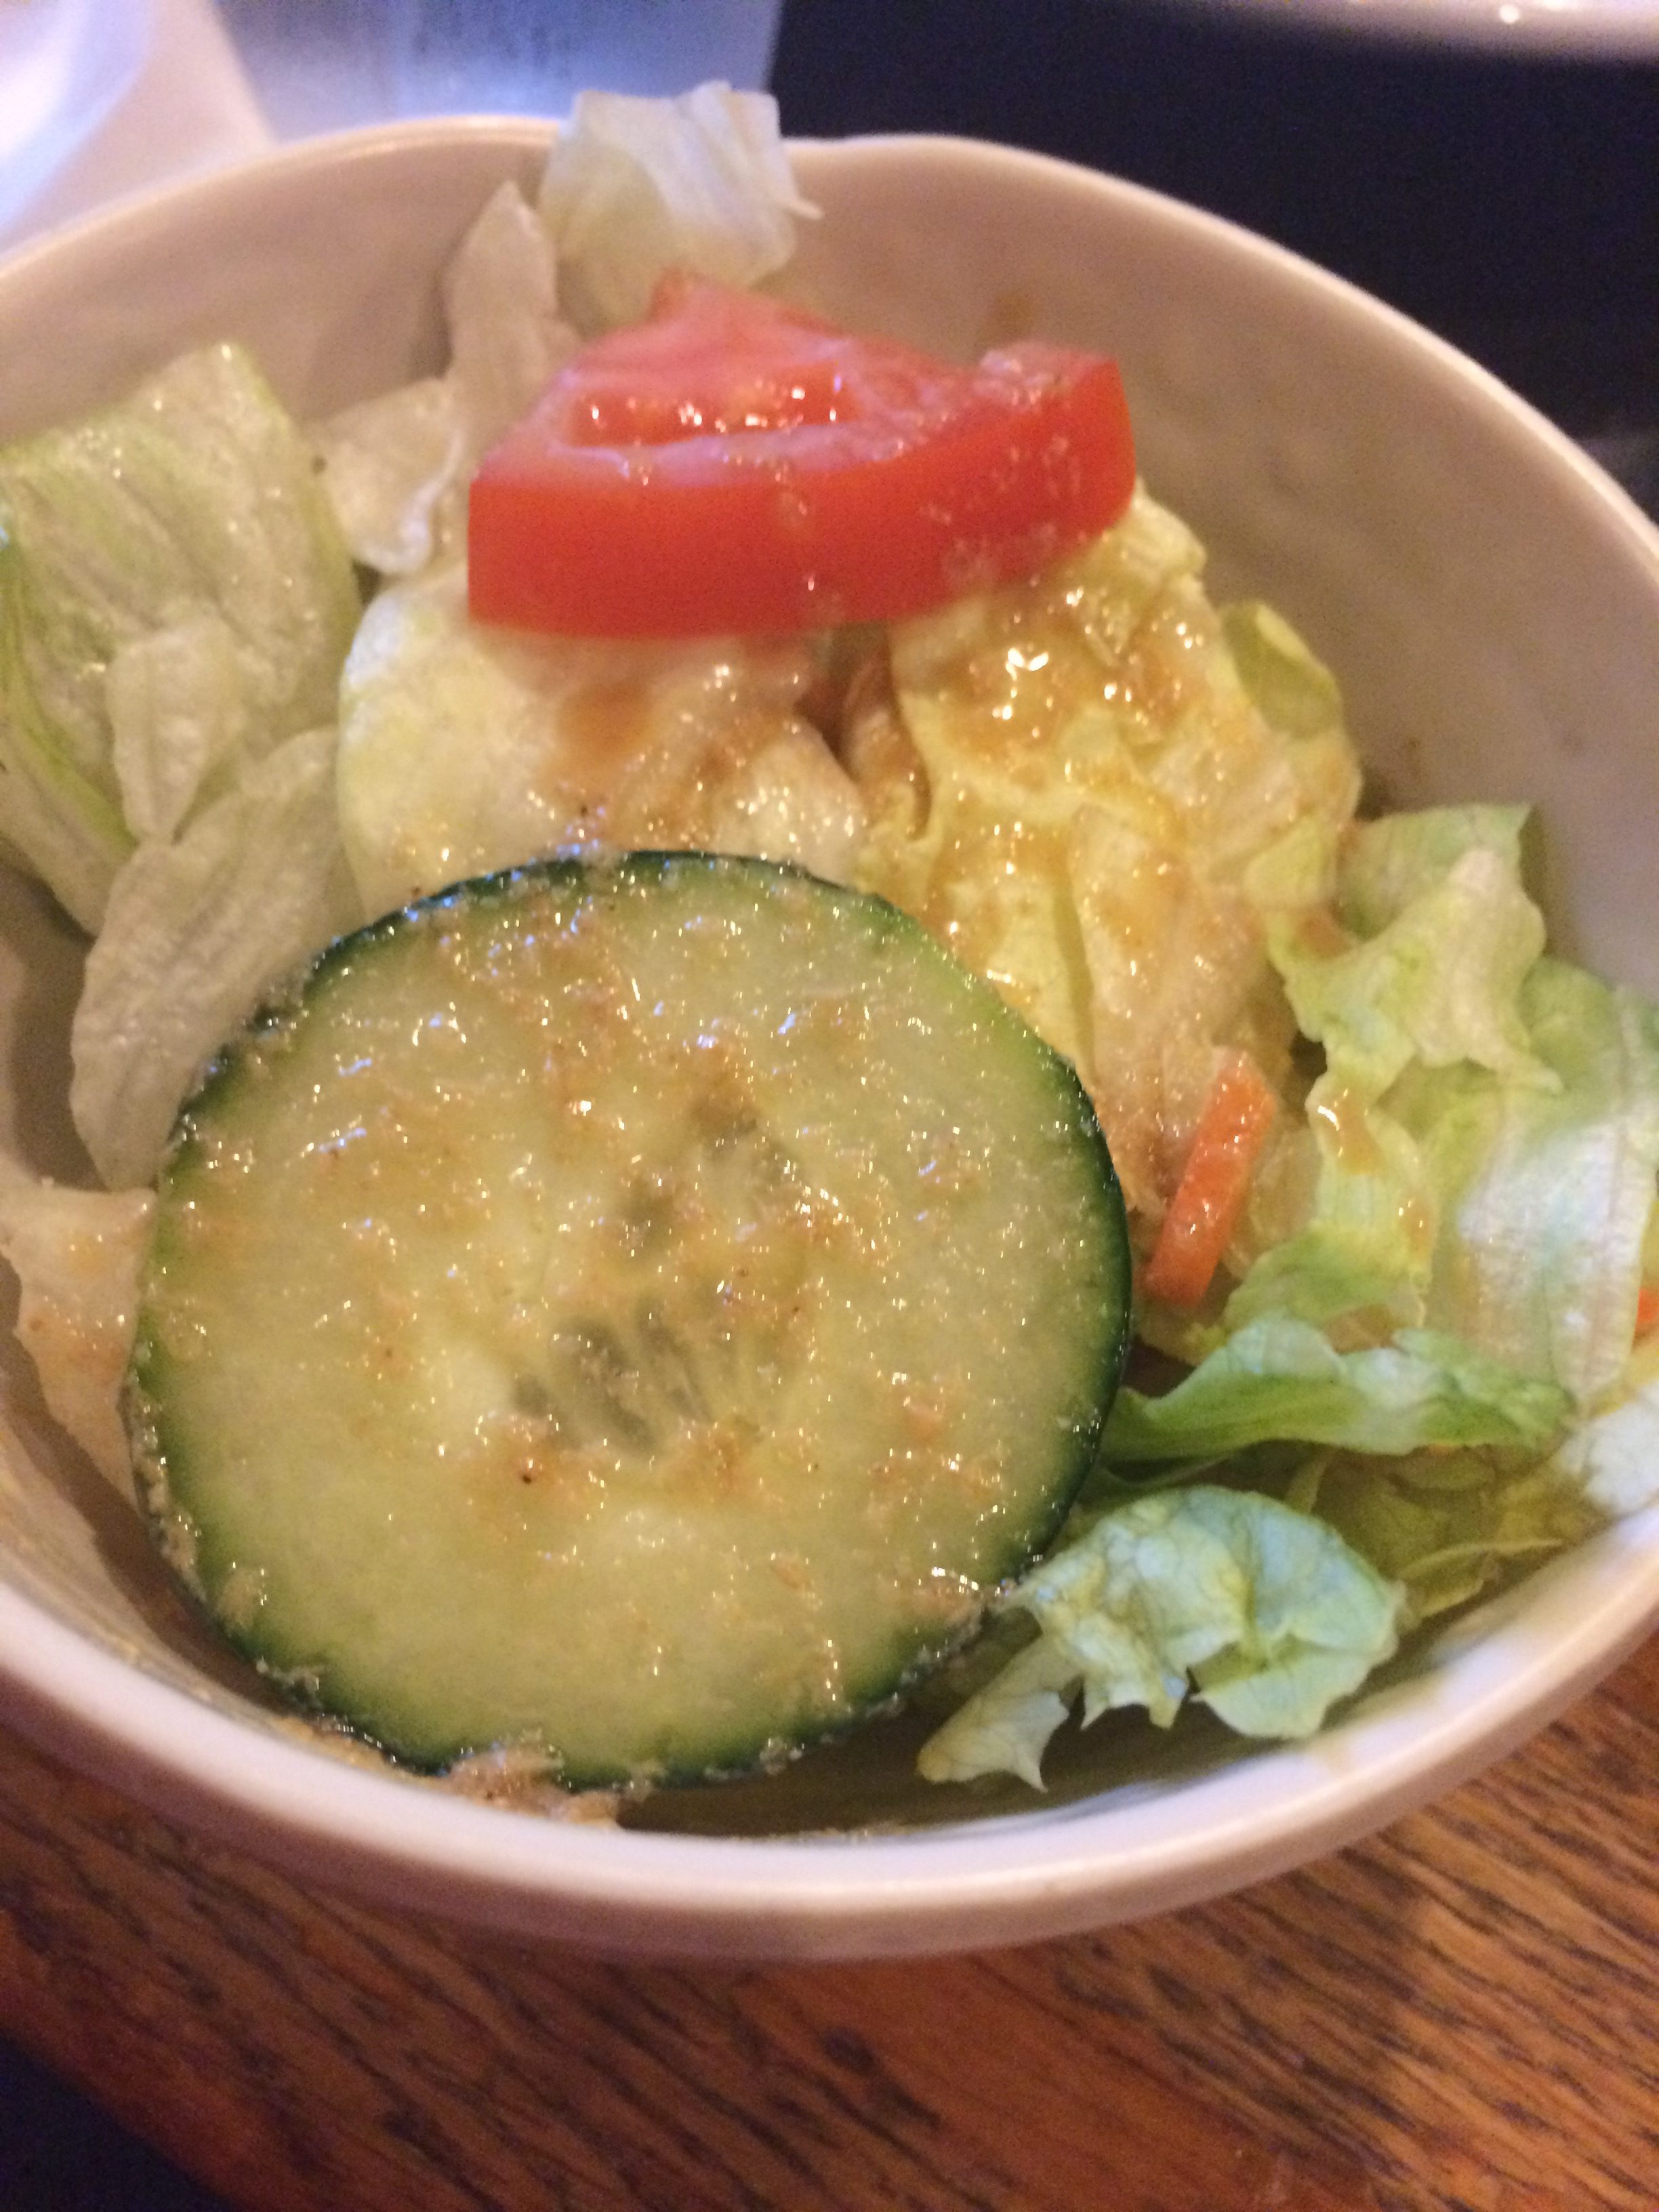 The salad looks basic, but it’s the dressing that makes it yummy. It’s a sweet based vinaigrette.